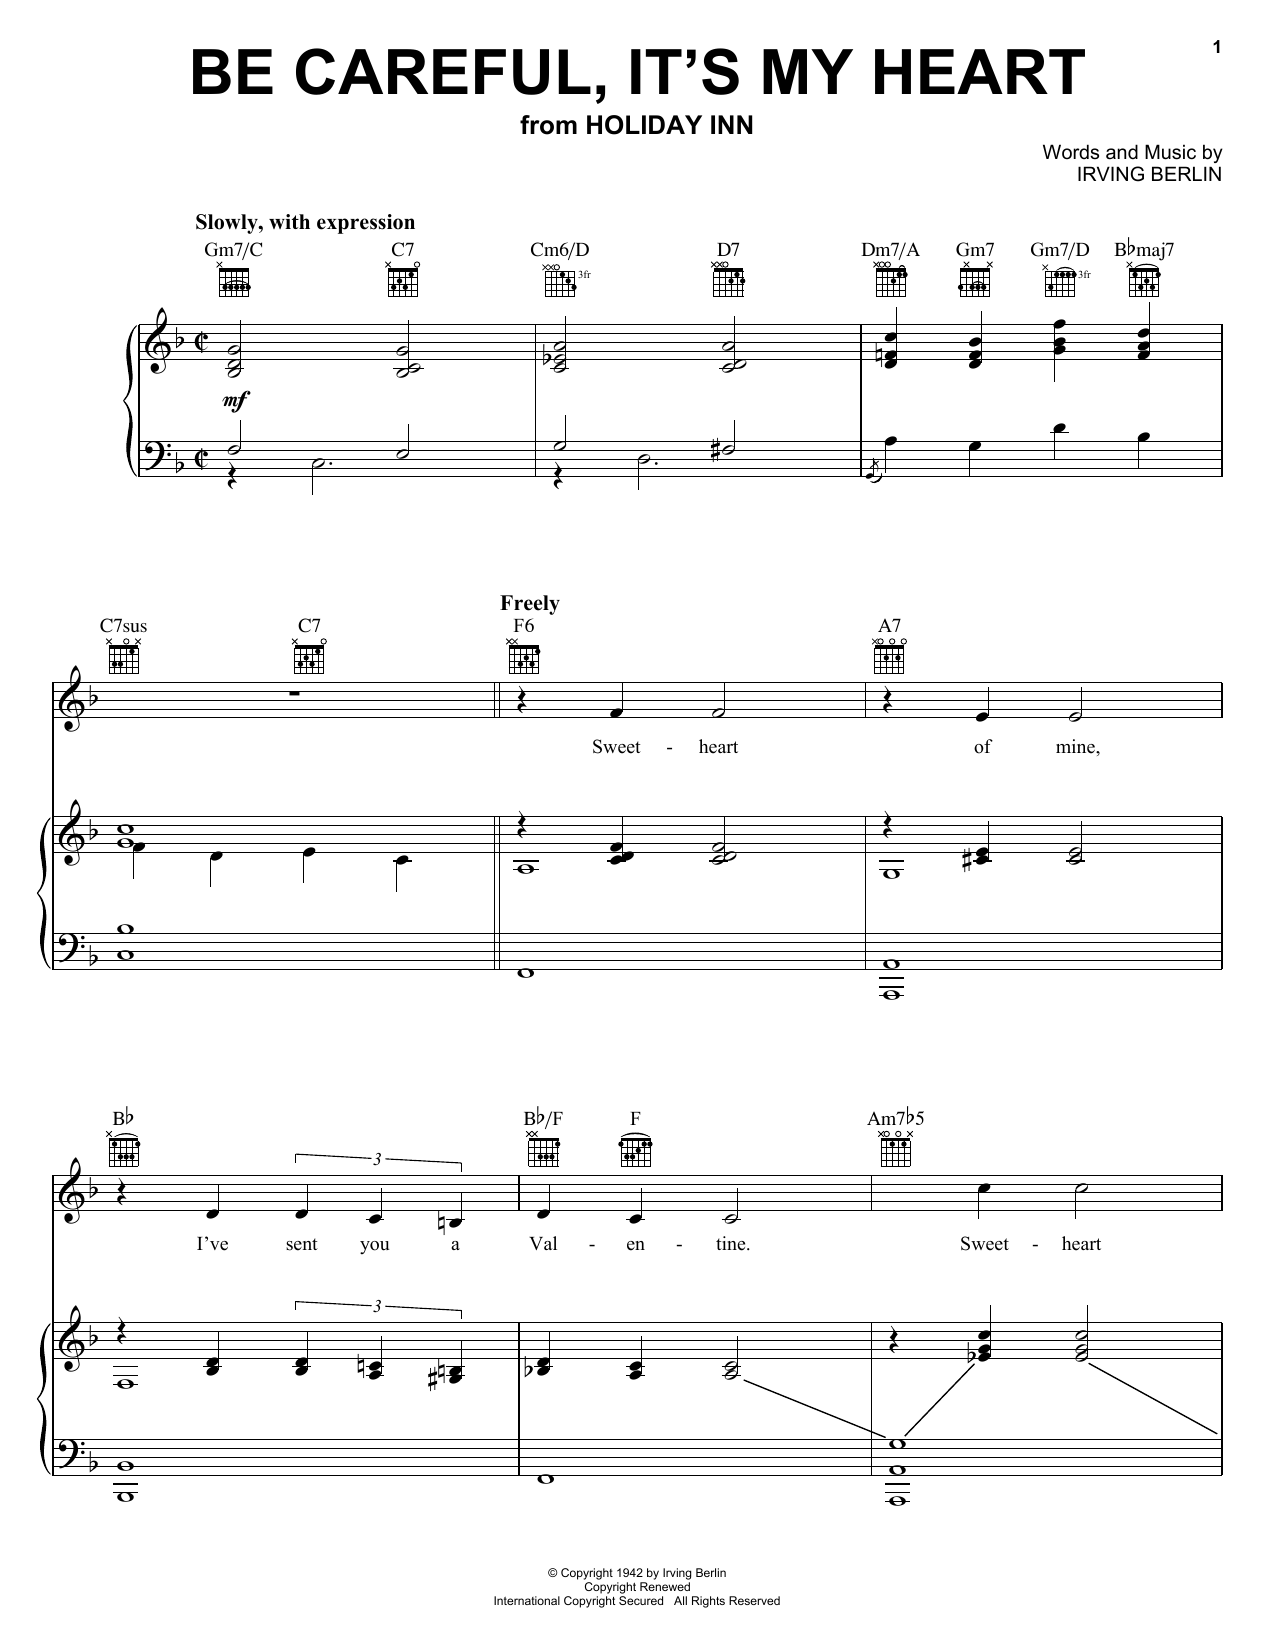 Irving Berlin Be Careful, It's My Heart sheet music notes and chords. Download Printable PDF.